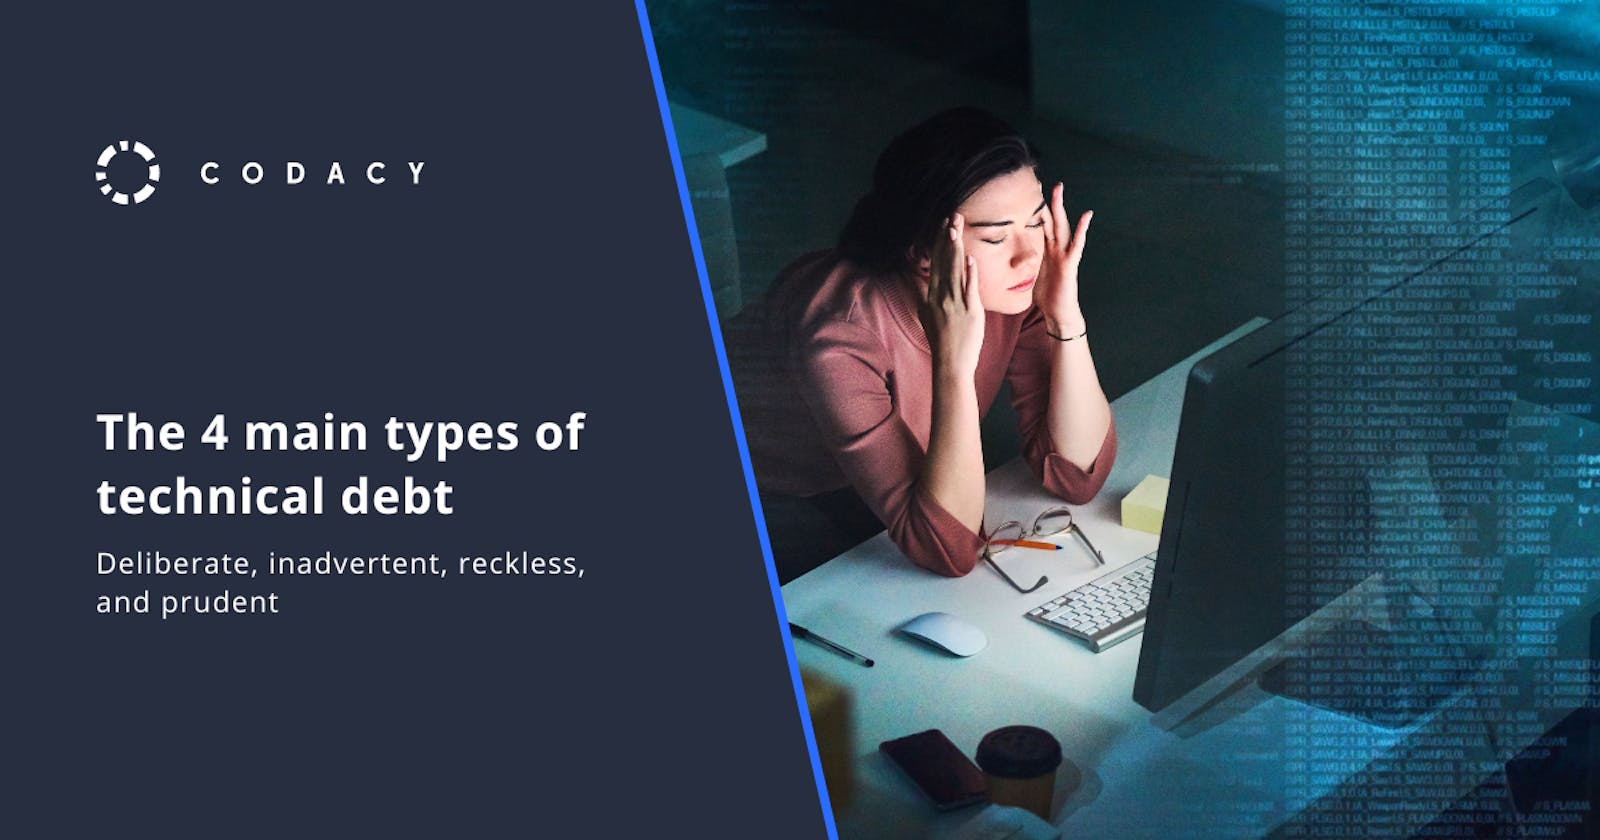 The 4 main types of technical debt